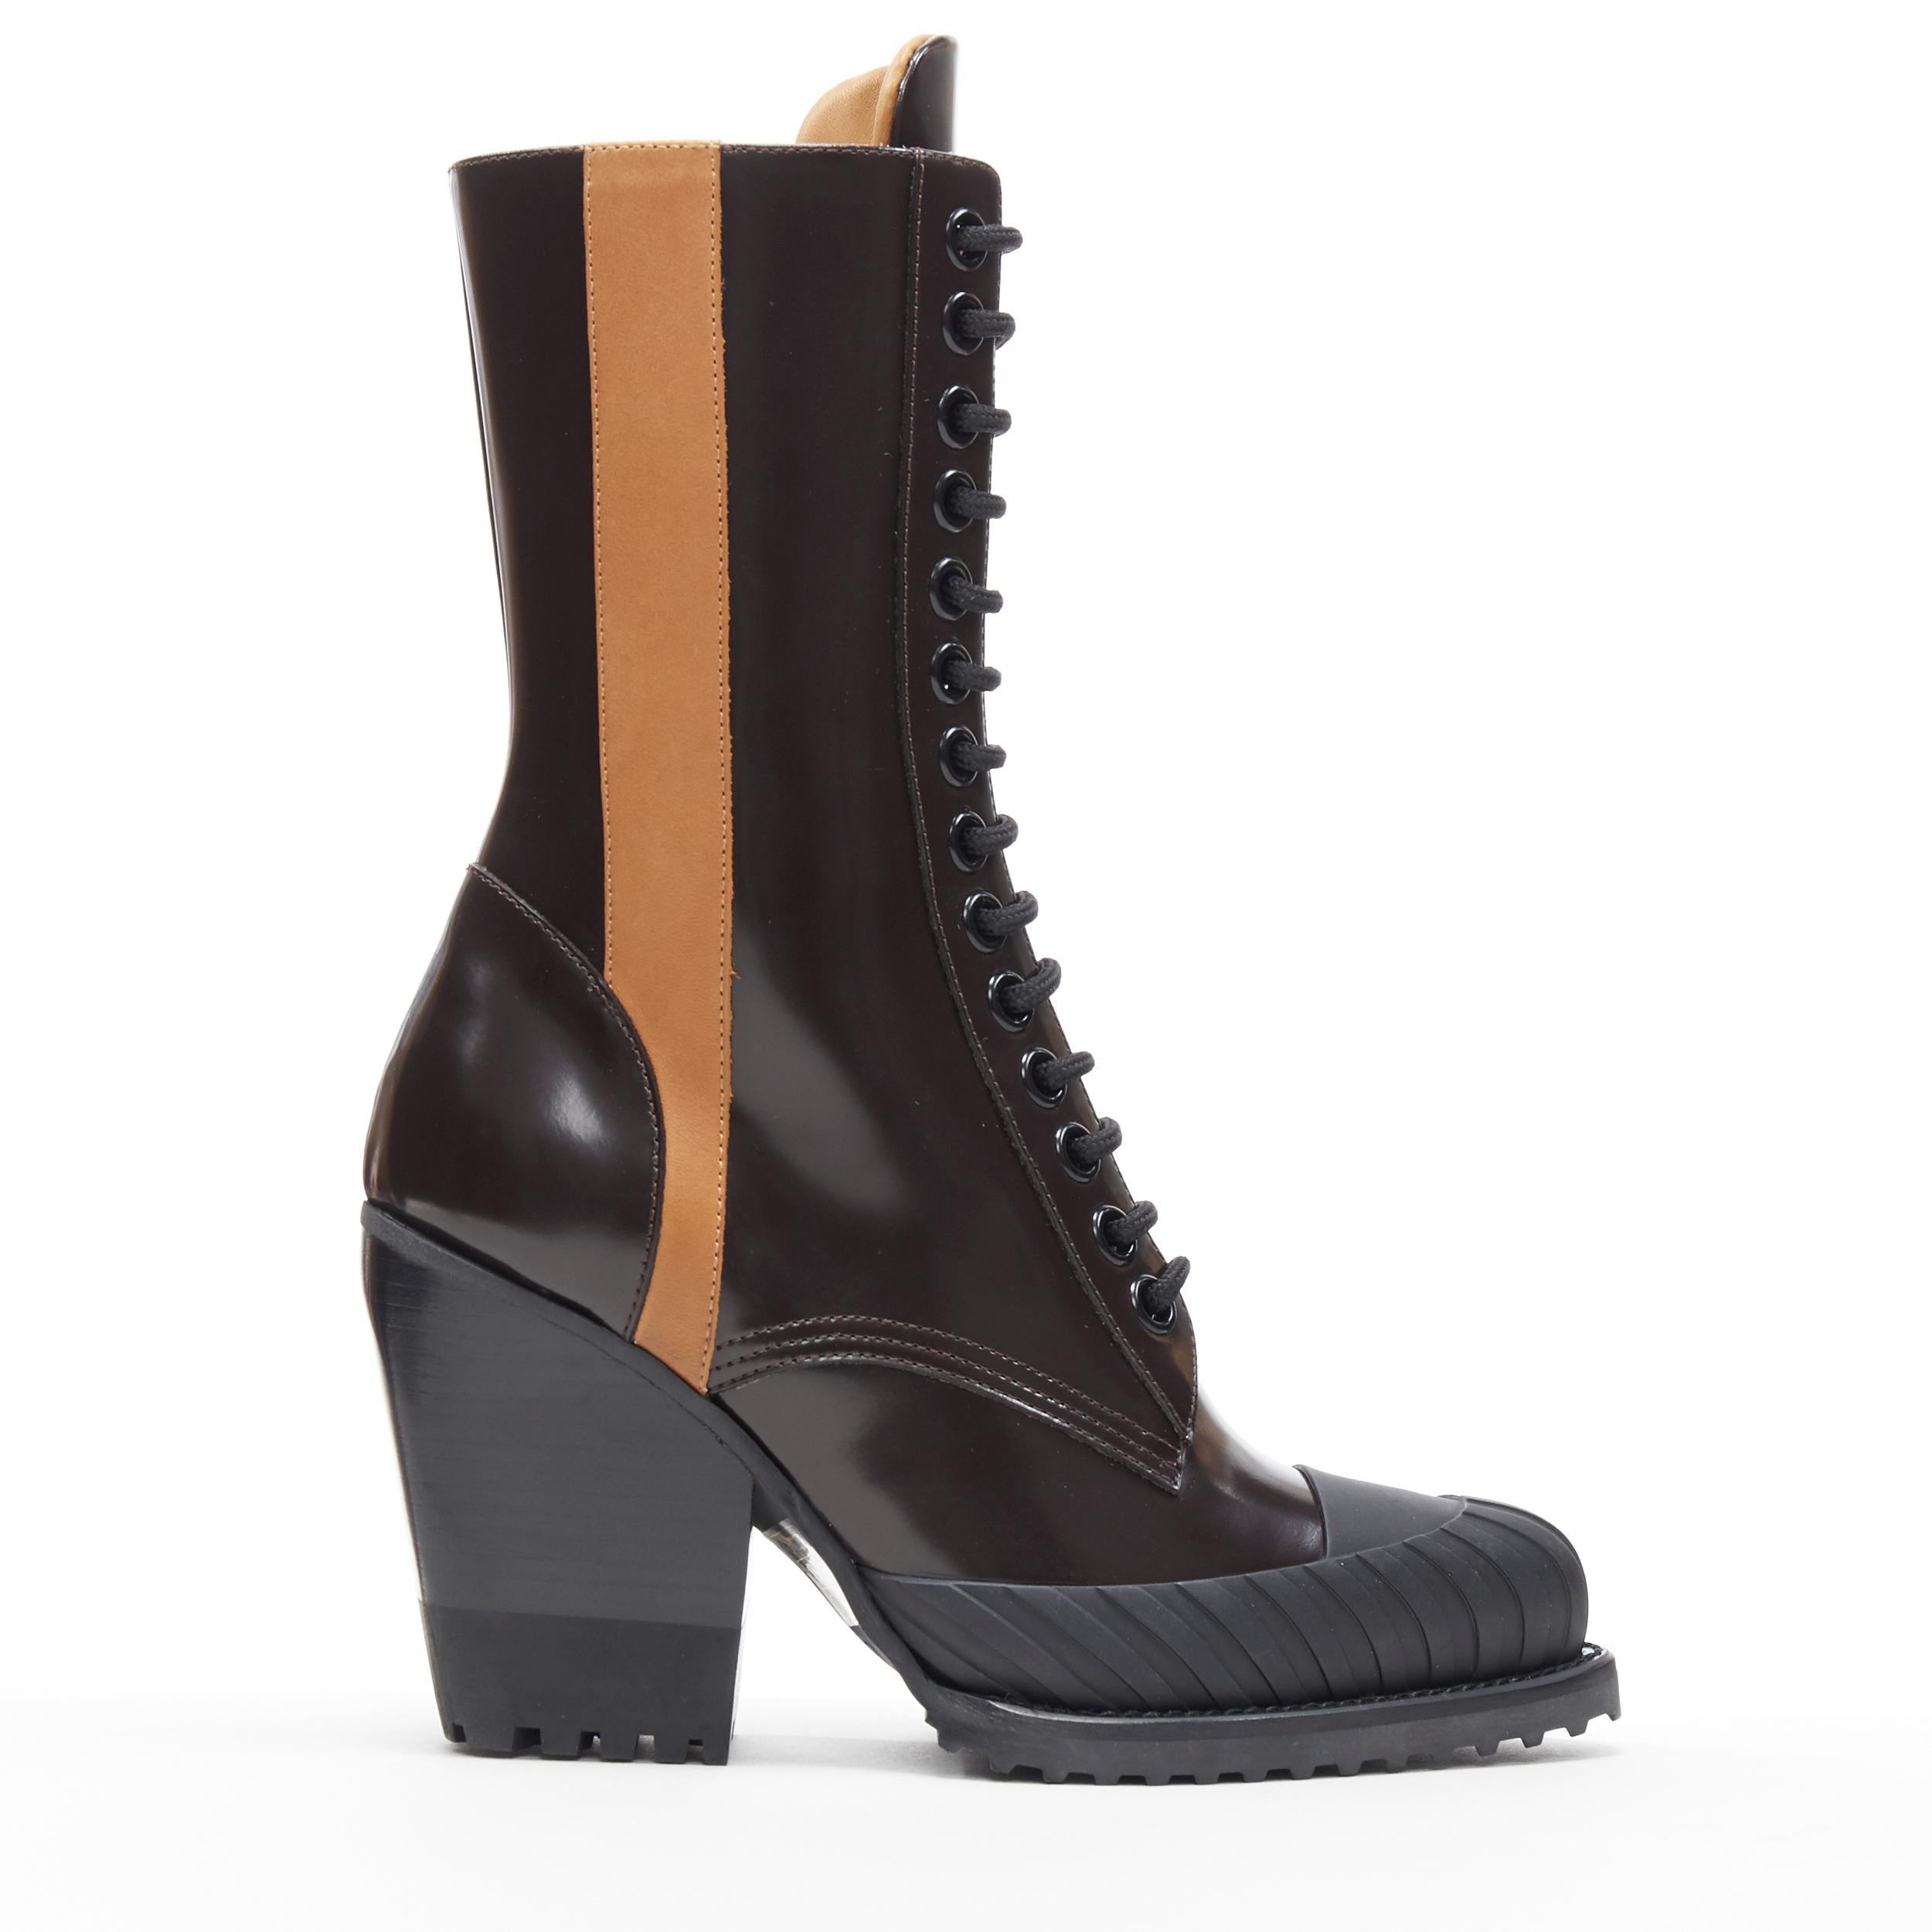 new CHLOE Runway Rylee brown glossy leather block heel heel rubber toe boot EU37
Brand: Chloe
Model Name / Style: Rylee
Material: Leather
Color: Brown
Pattern: Solid
Closure: Lace up
Extra Detail: Signature Runway Rylee boots by Chloe. Ankle boots.